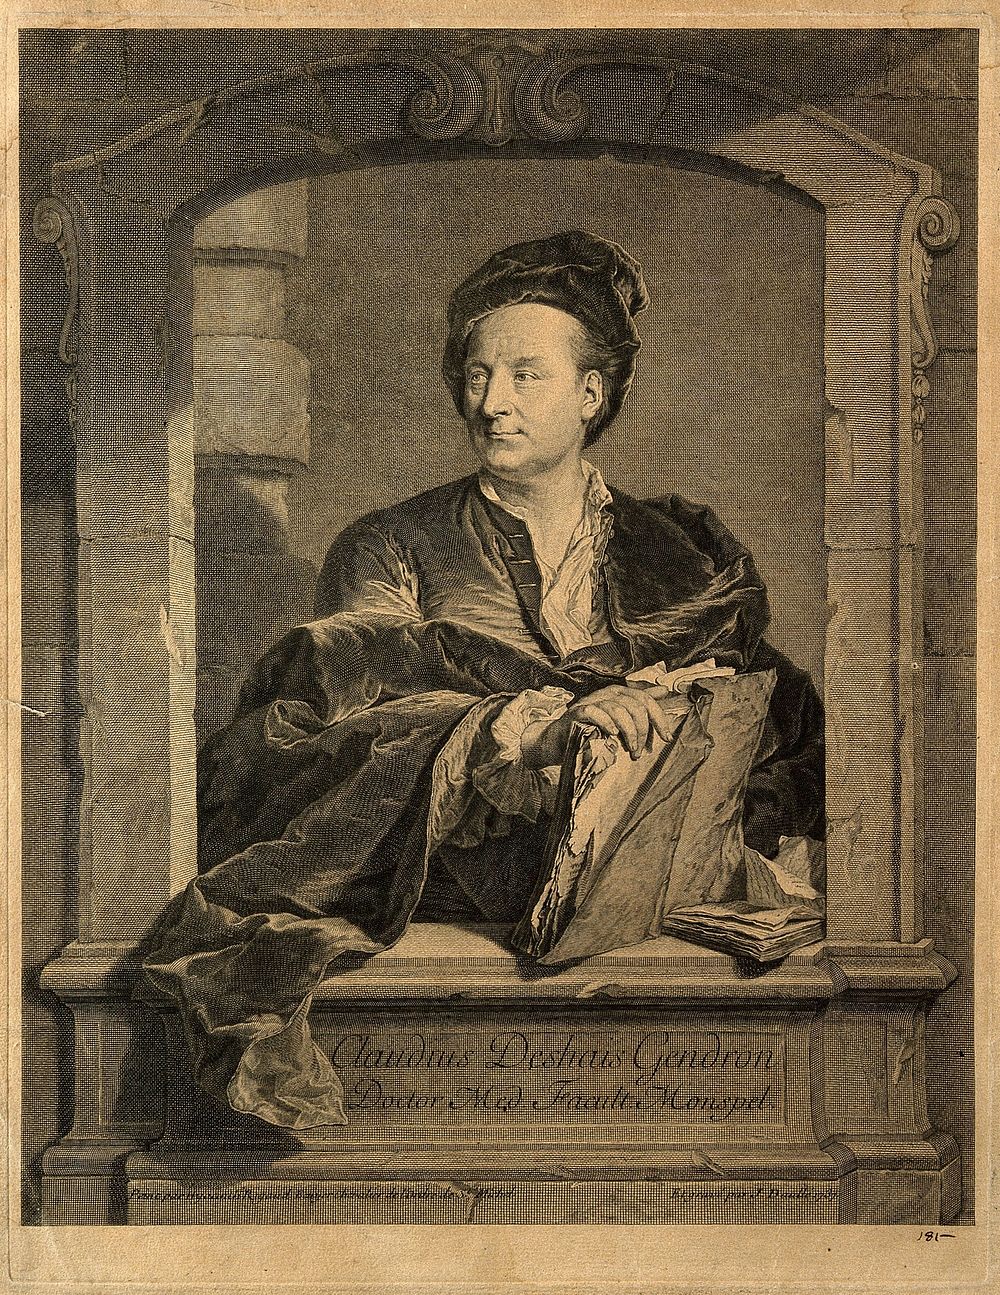 Claude Deshayes Gendron. Line engraving by J. Daullé, 1787, after H. Rigaud.